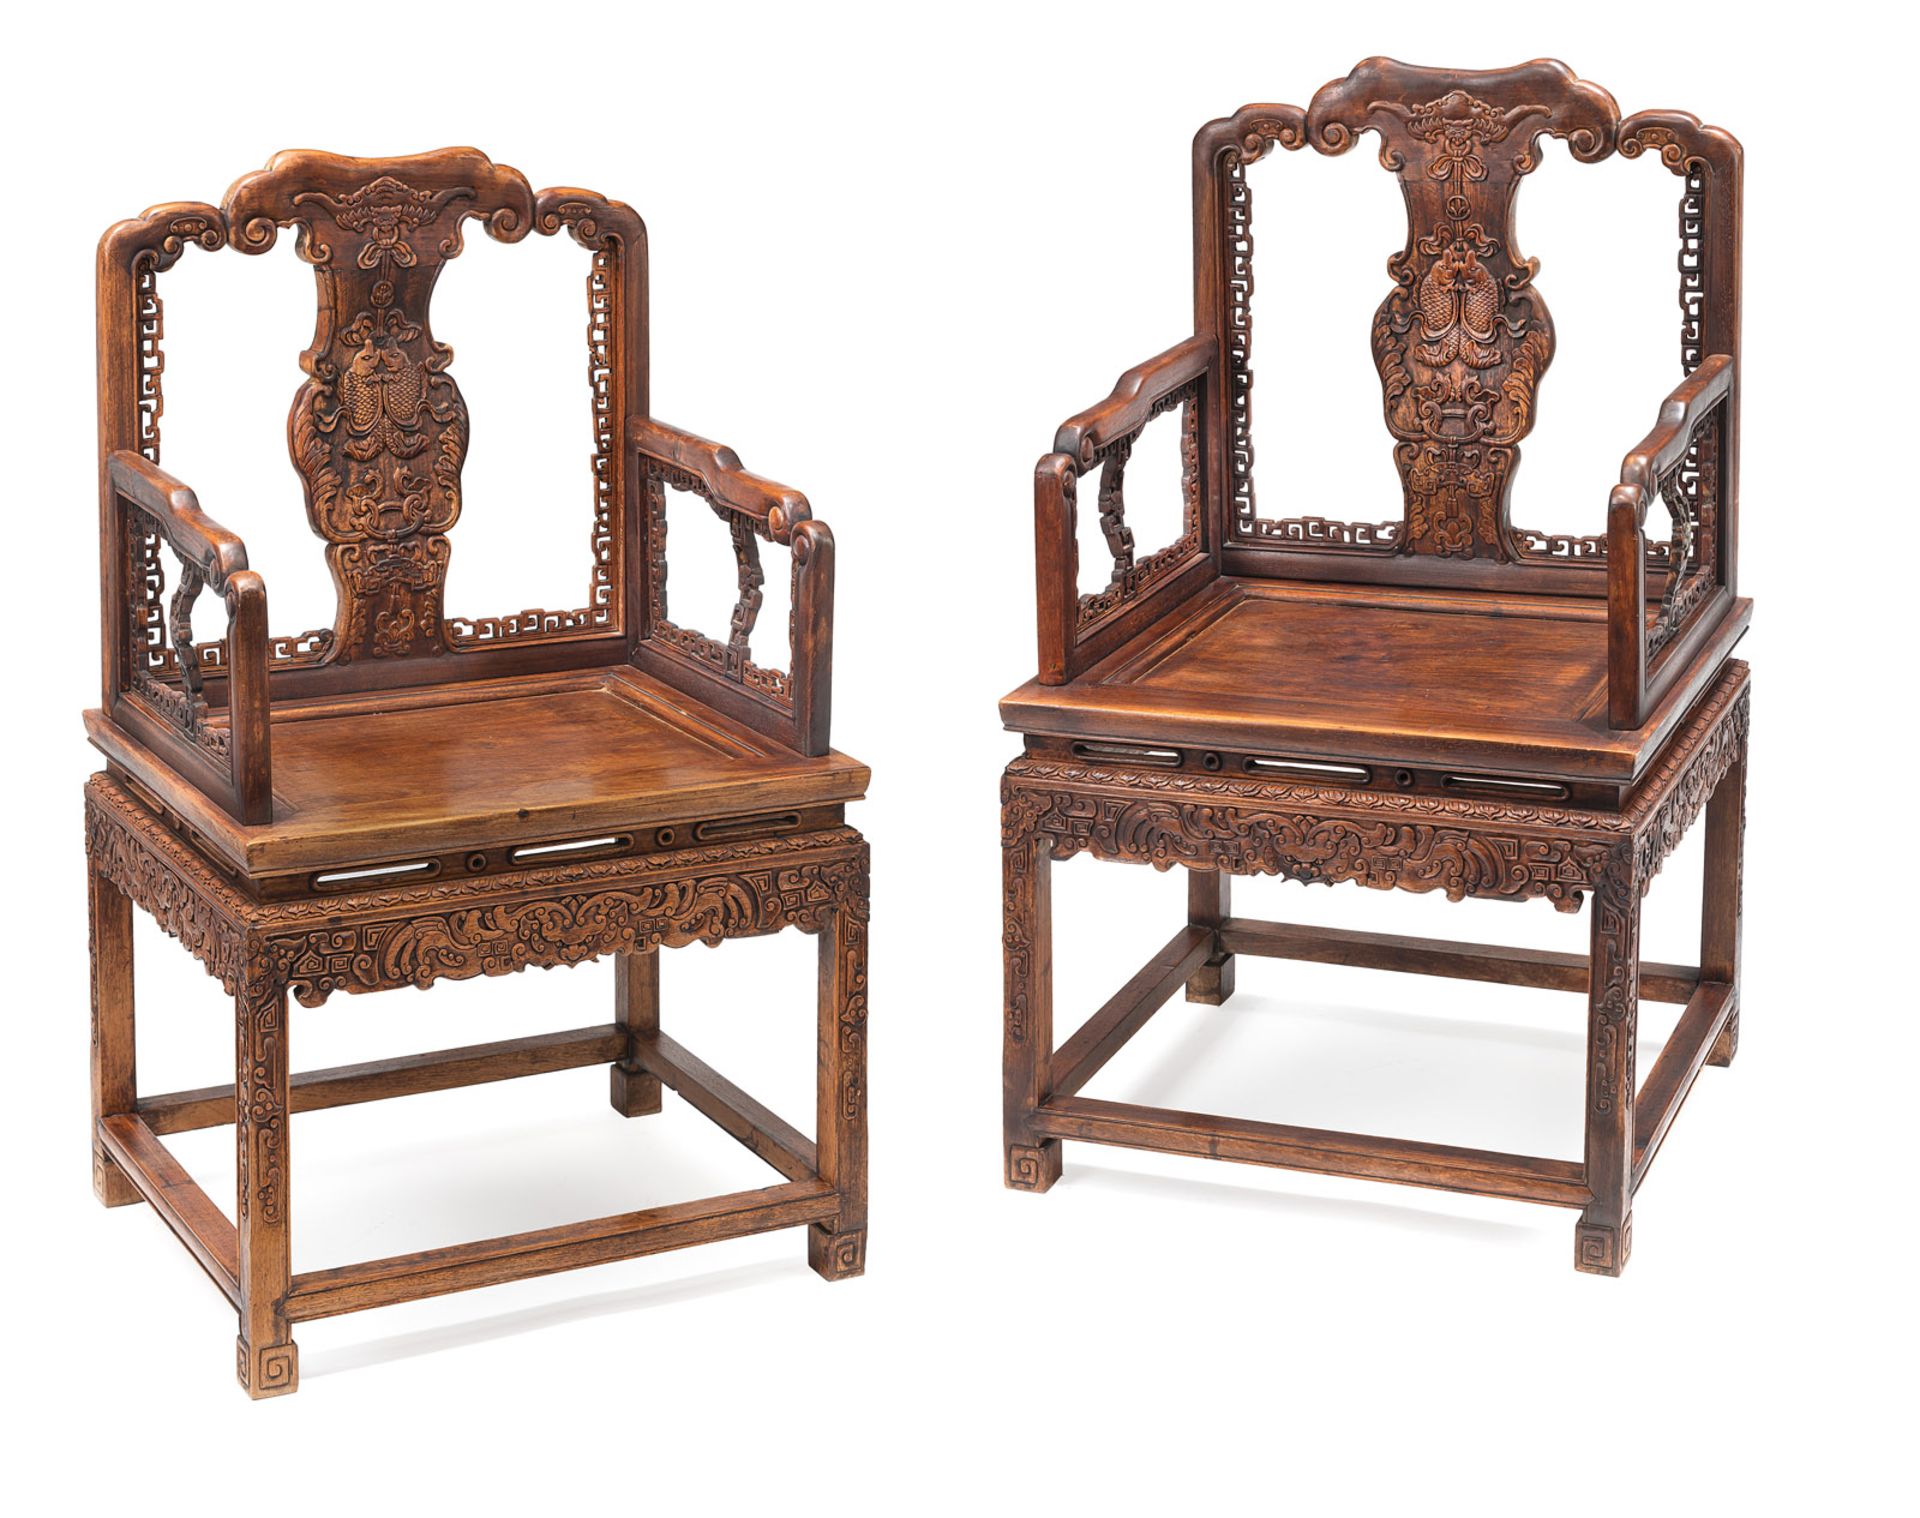 A PAIR OF CARVED RELIEF AUSPICIOUS BATS AND FISH ARMCHAIRS